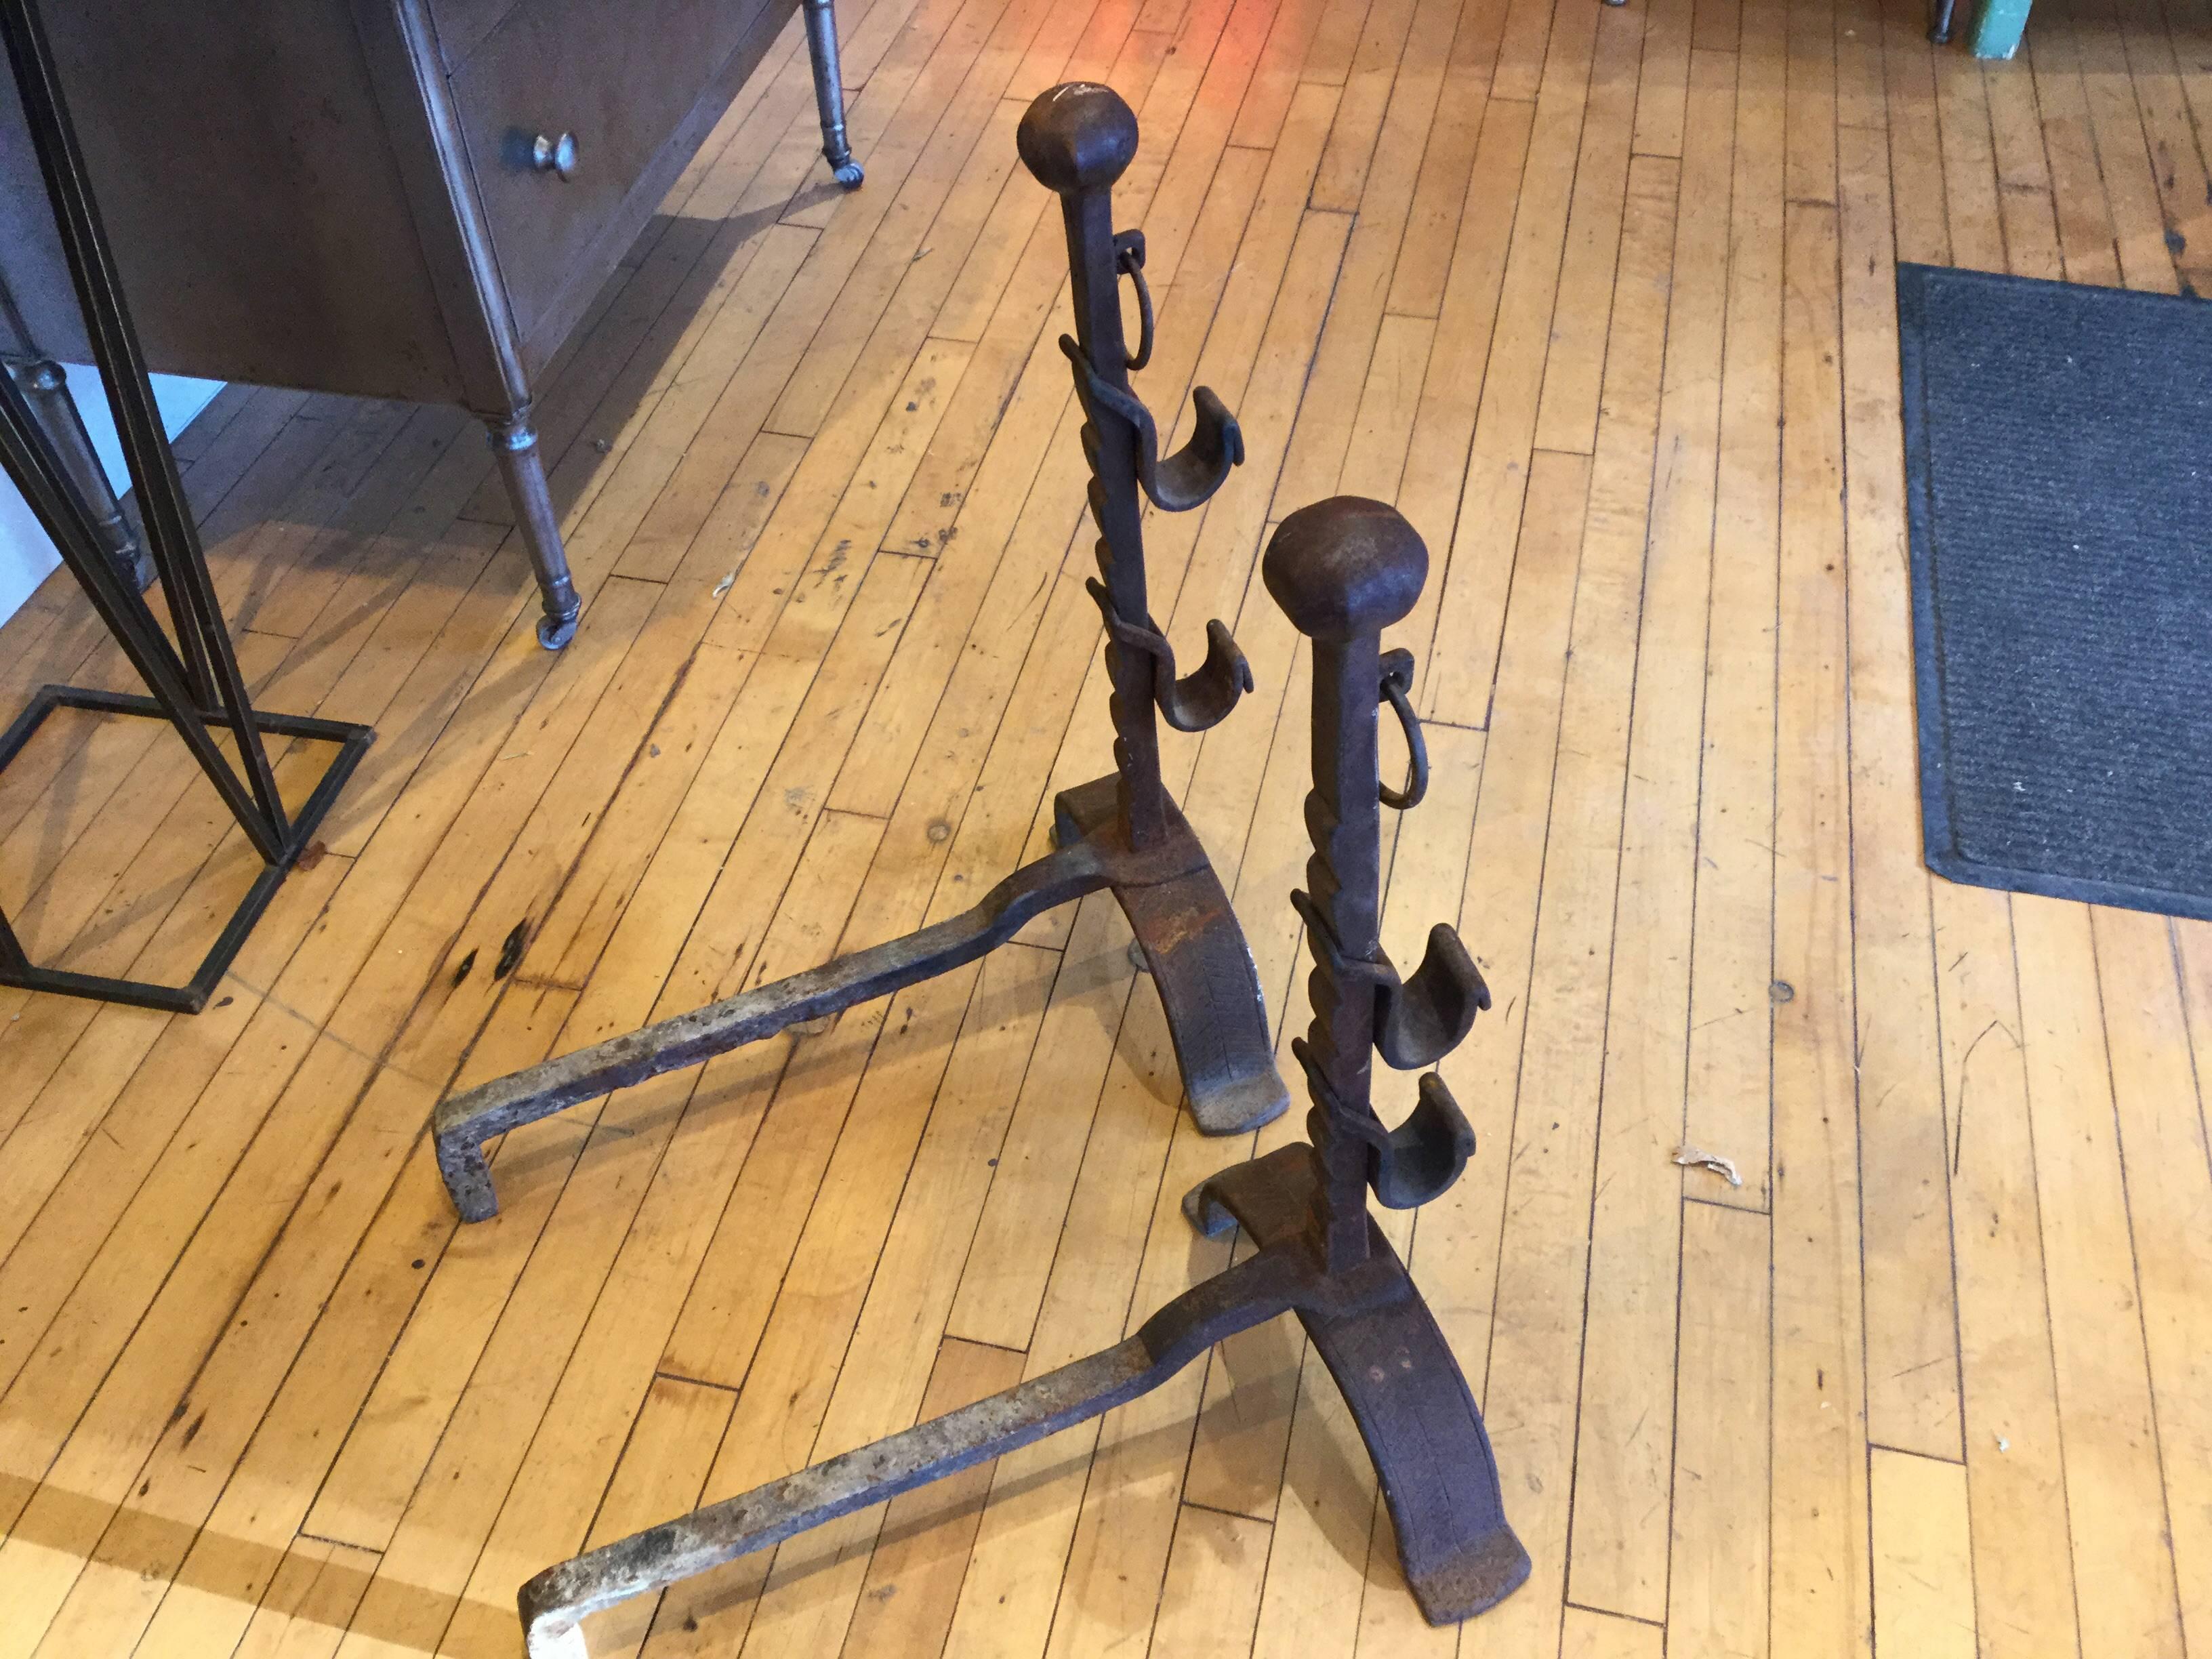 Large pair of 18th century hand-forged fireplace tools or log holders. Herringbone design inscribed in the feet and brackets. You can almost see the iron being molded by hand. These were used for cooking in a fireplace and have several levels the